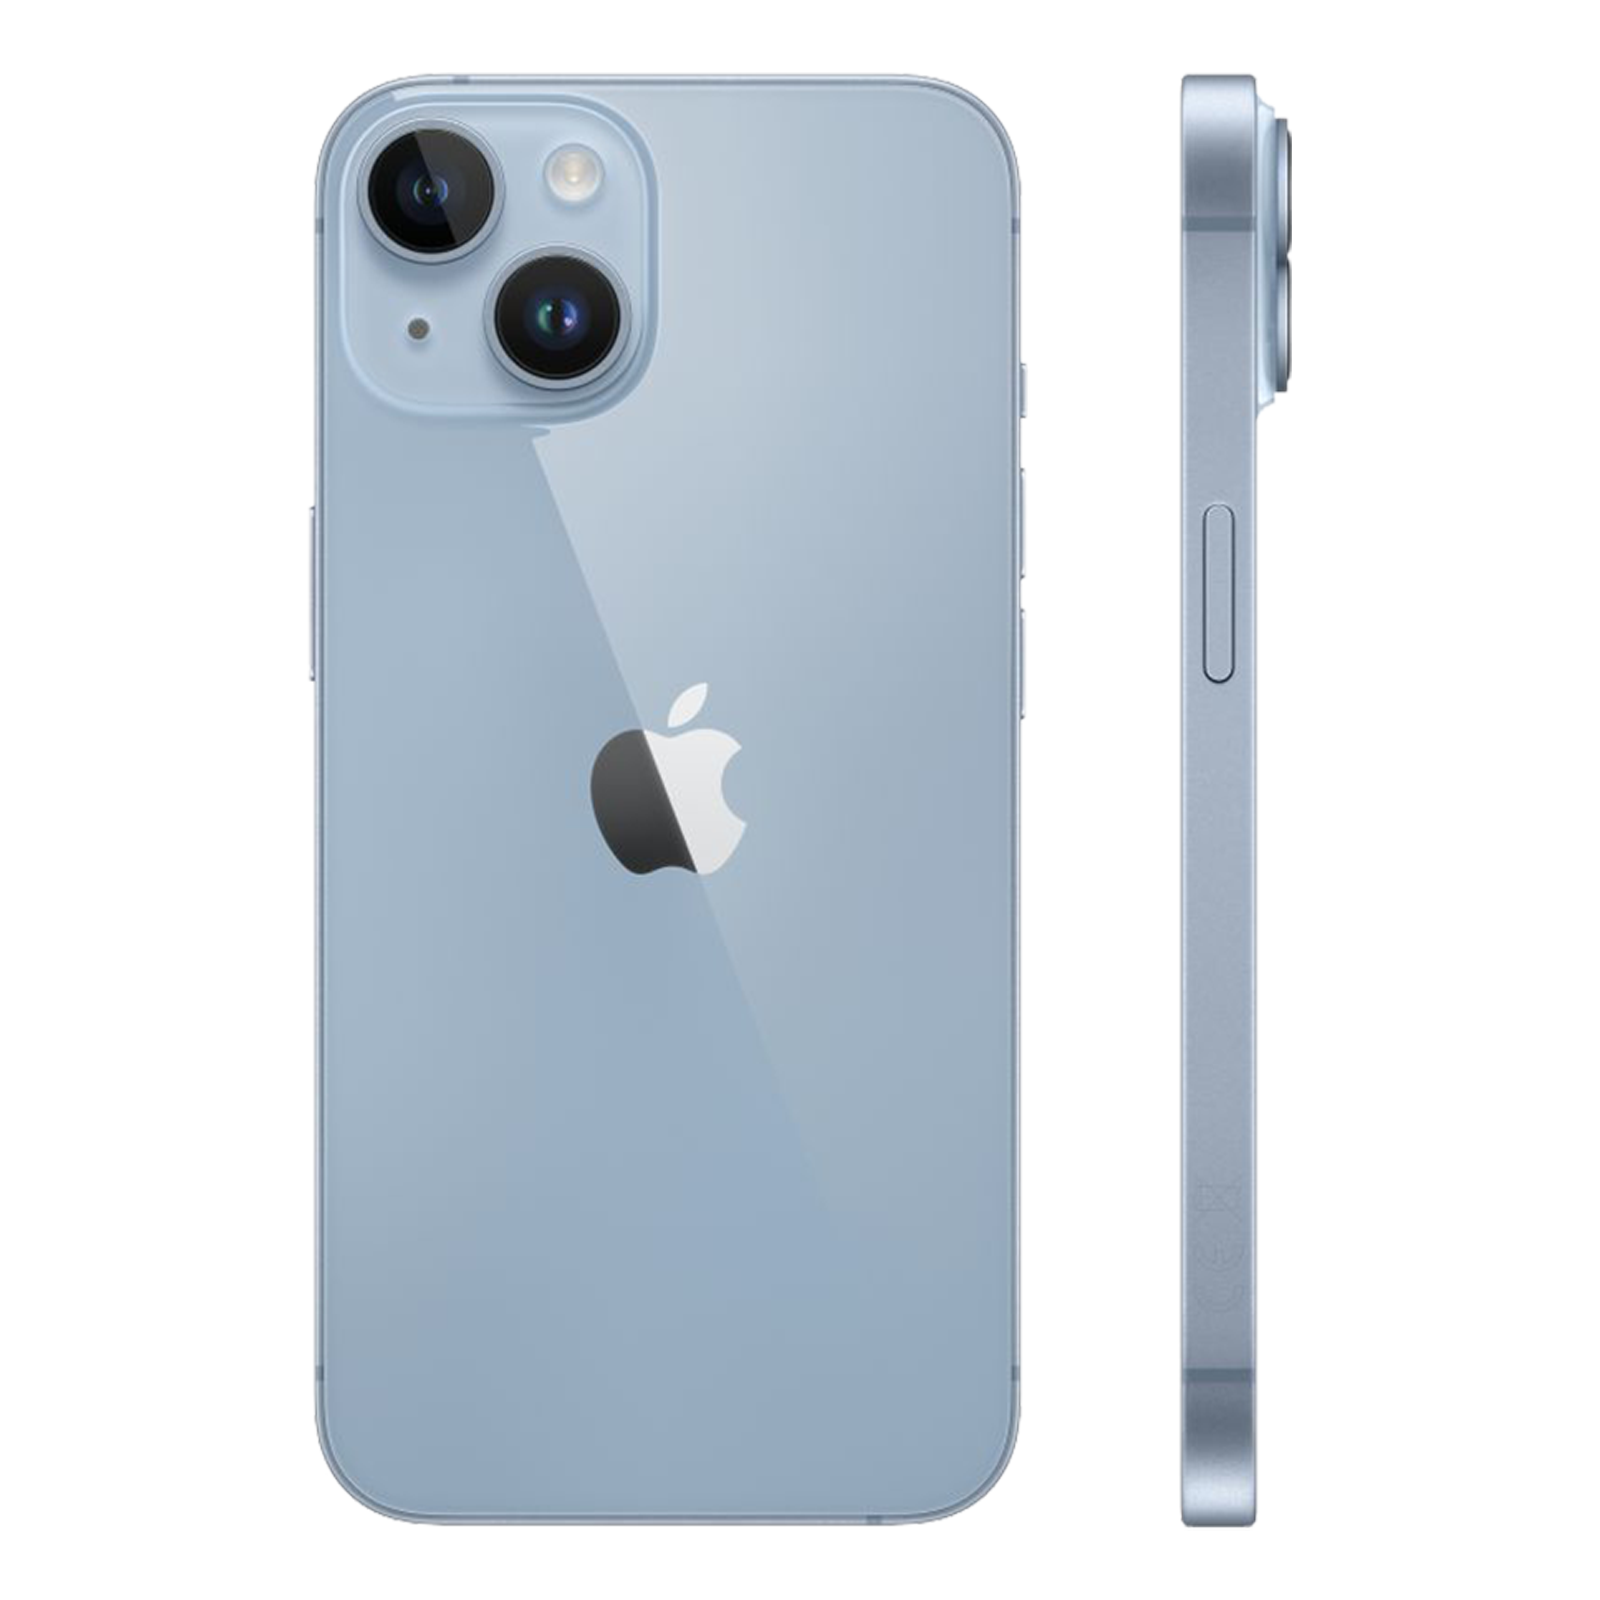 Get iPhone 14 (Blue,128GB) online at best price in india